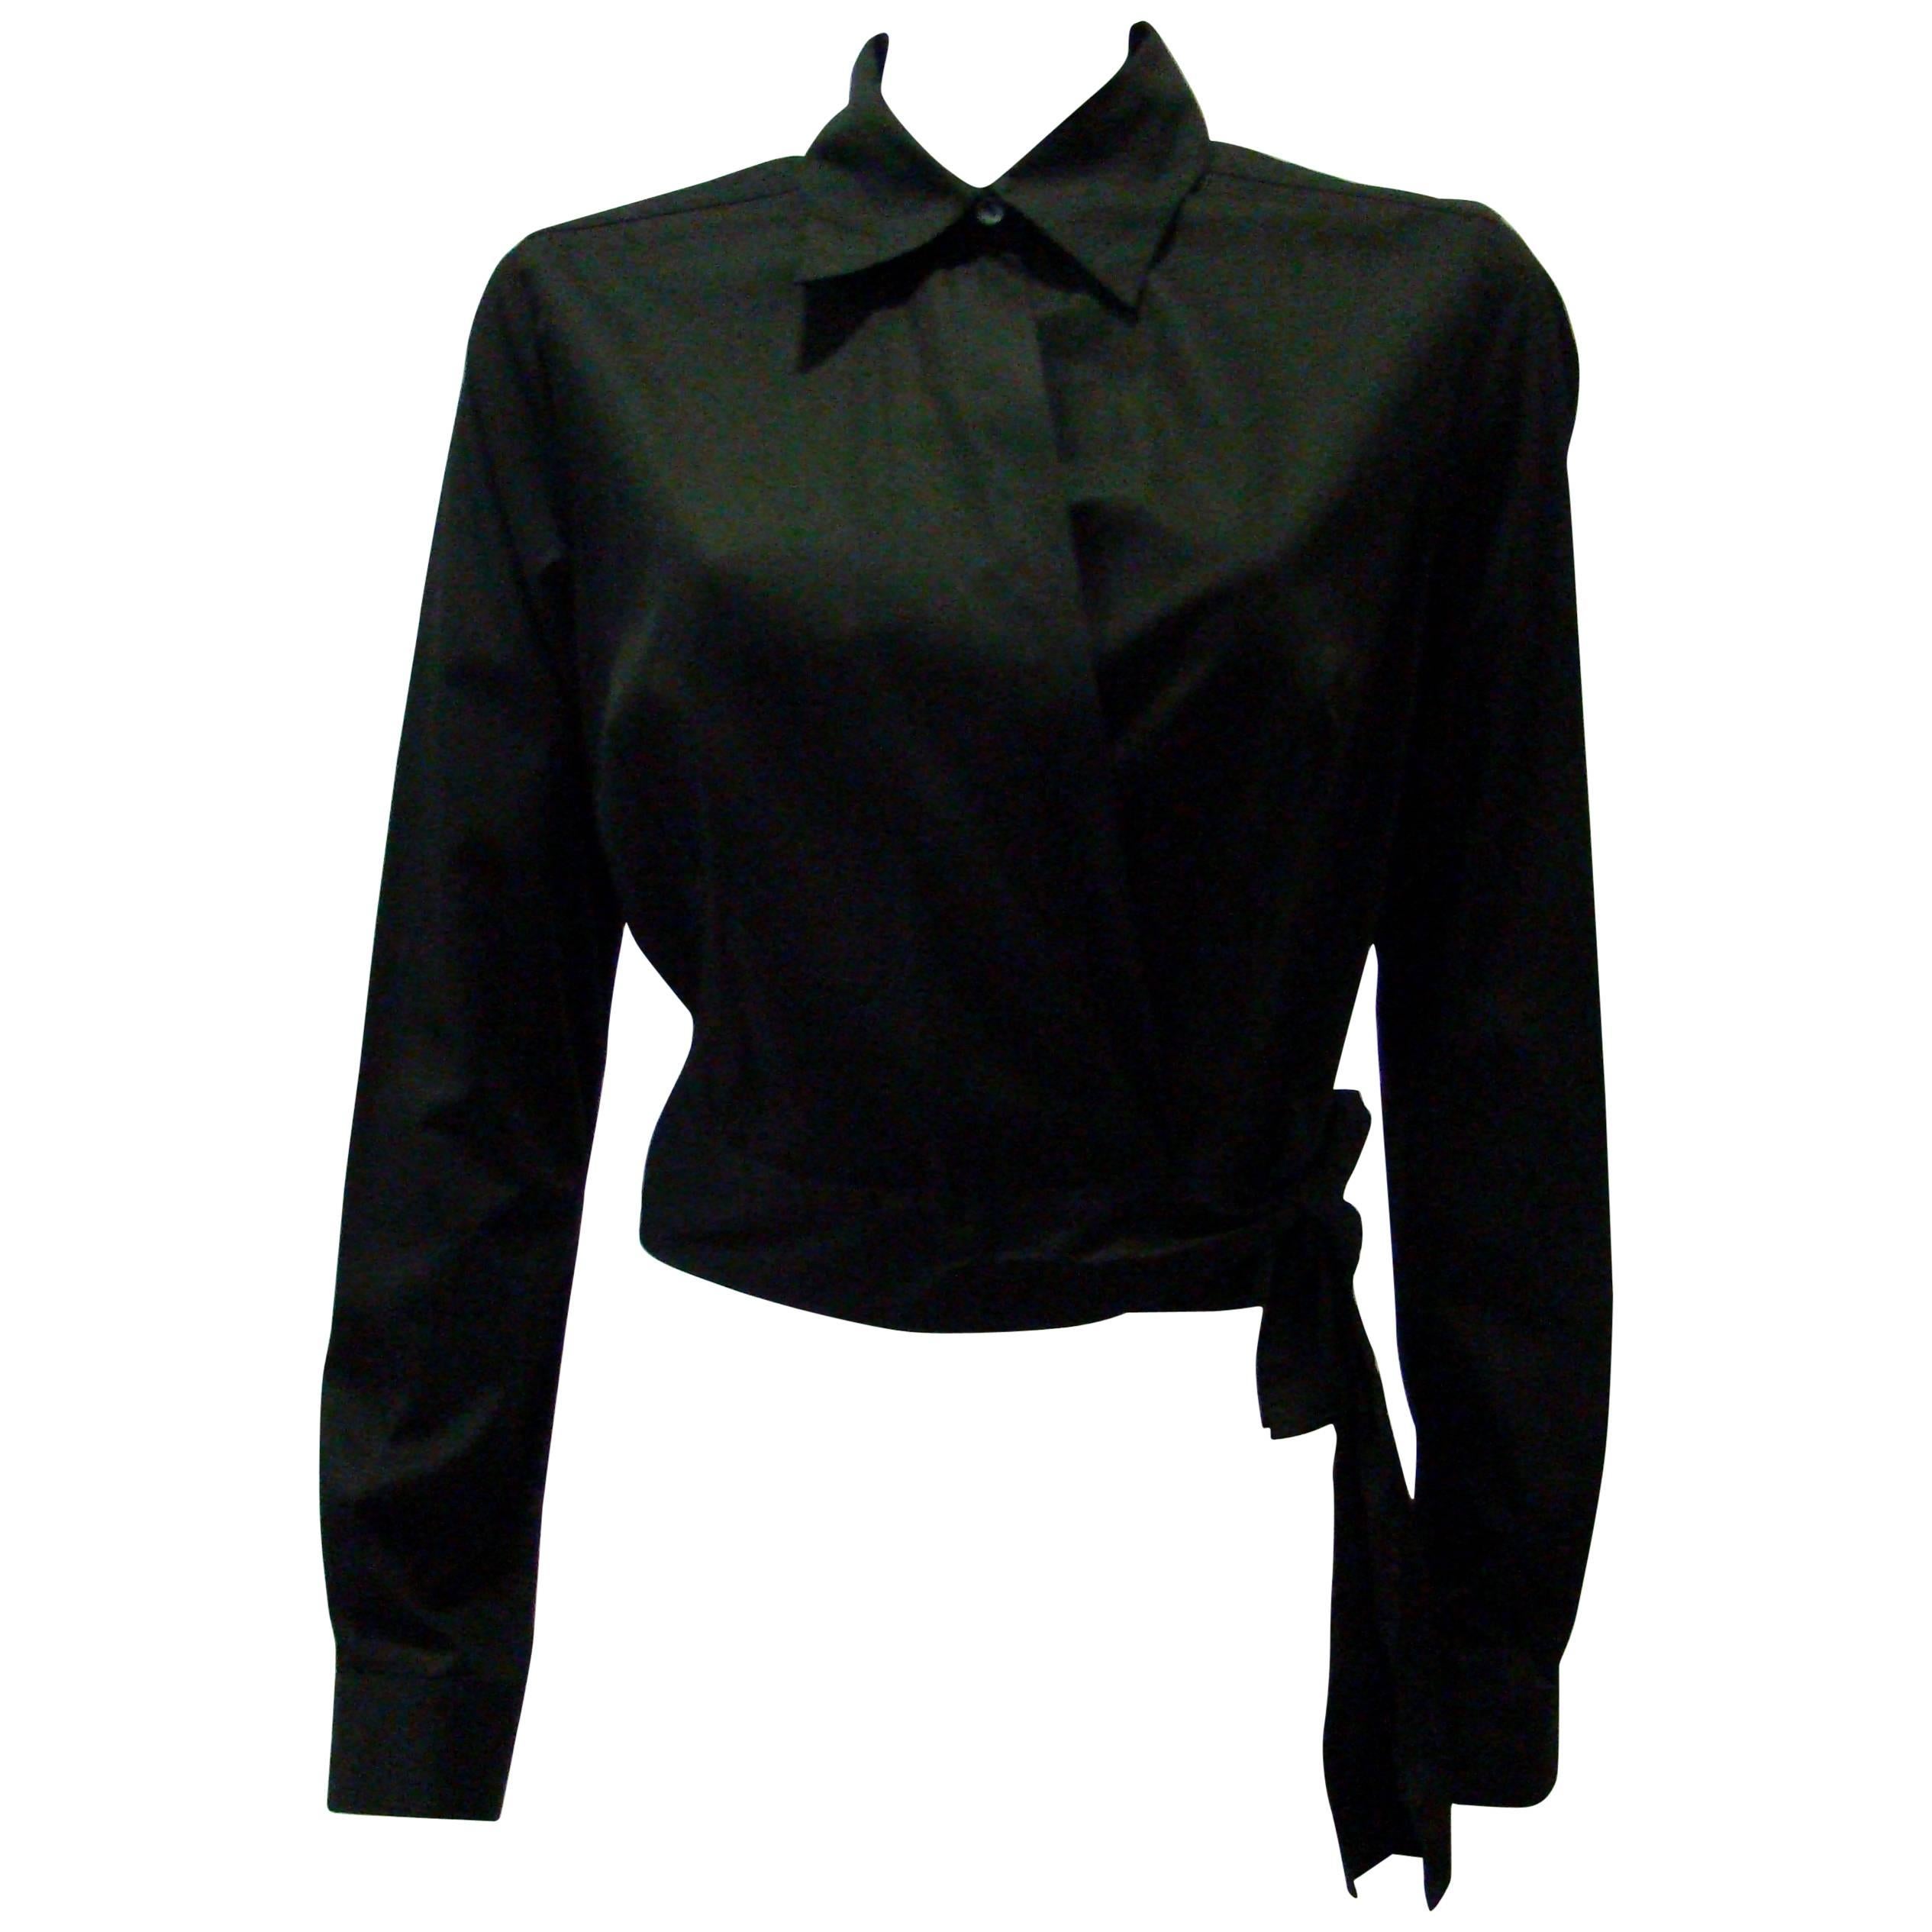 Angelo Tarlazzi Black Cotton Short Jacket With Sheer Net Back For Sale